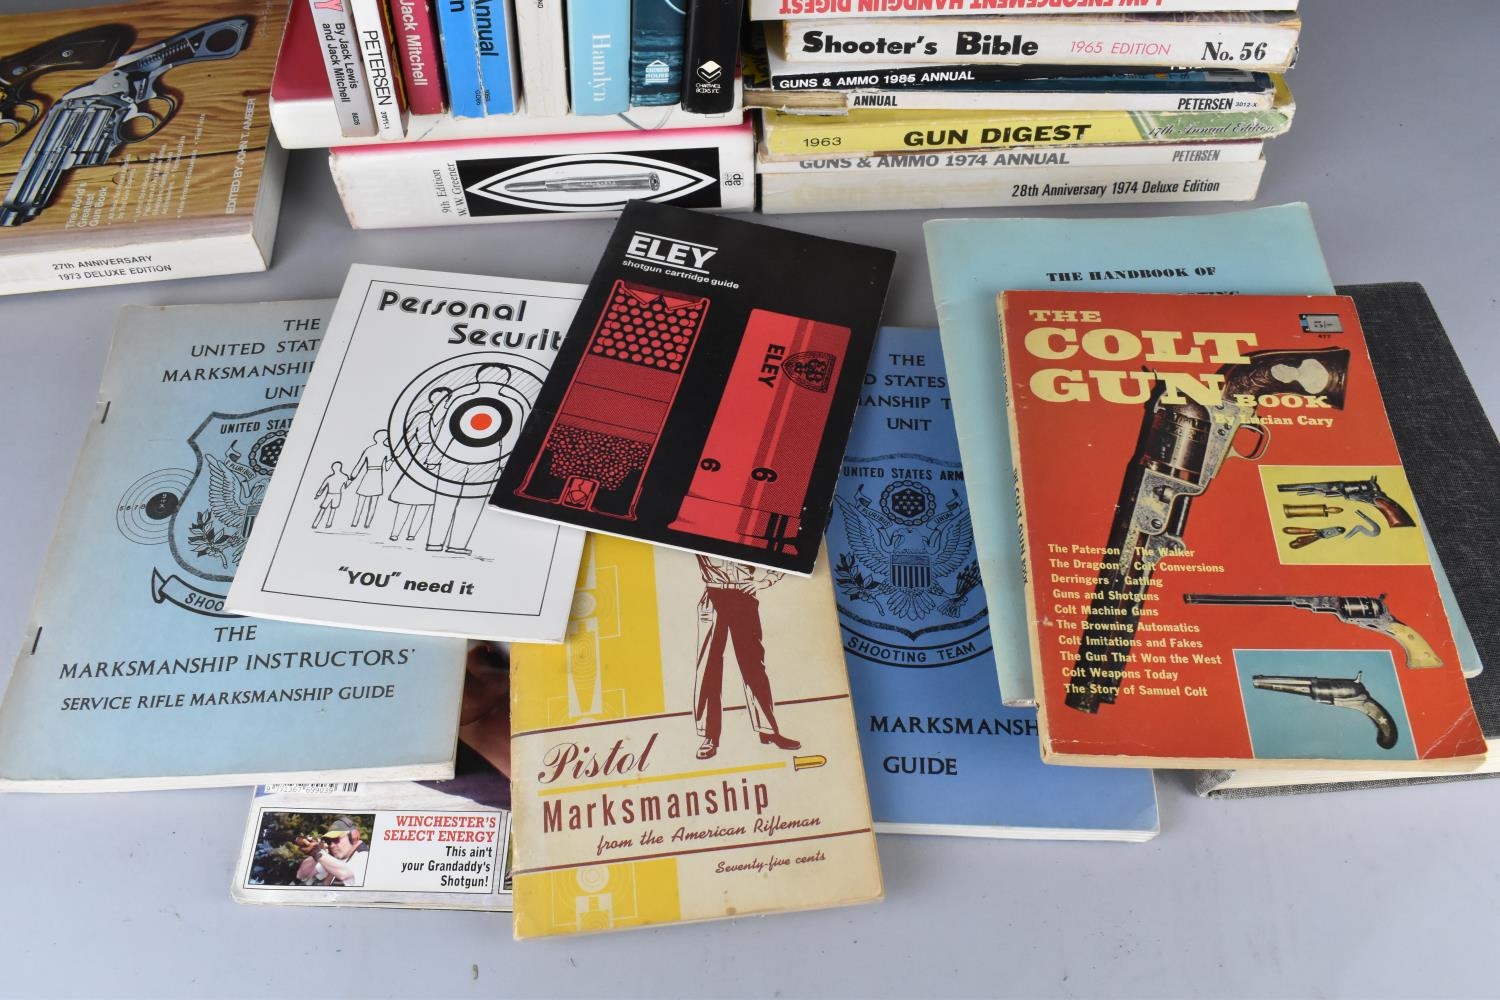 A Collection of Various Books and Pamphlets on a Topic of Guns, Gun Digest, Eley etc - Image 2 of 2